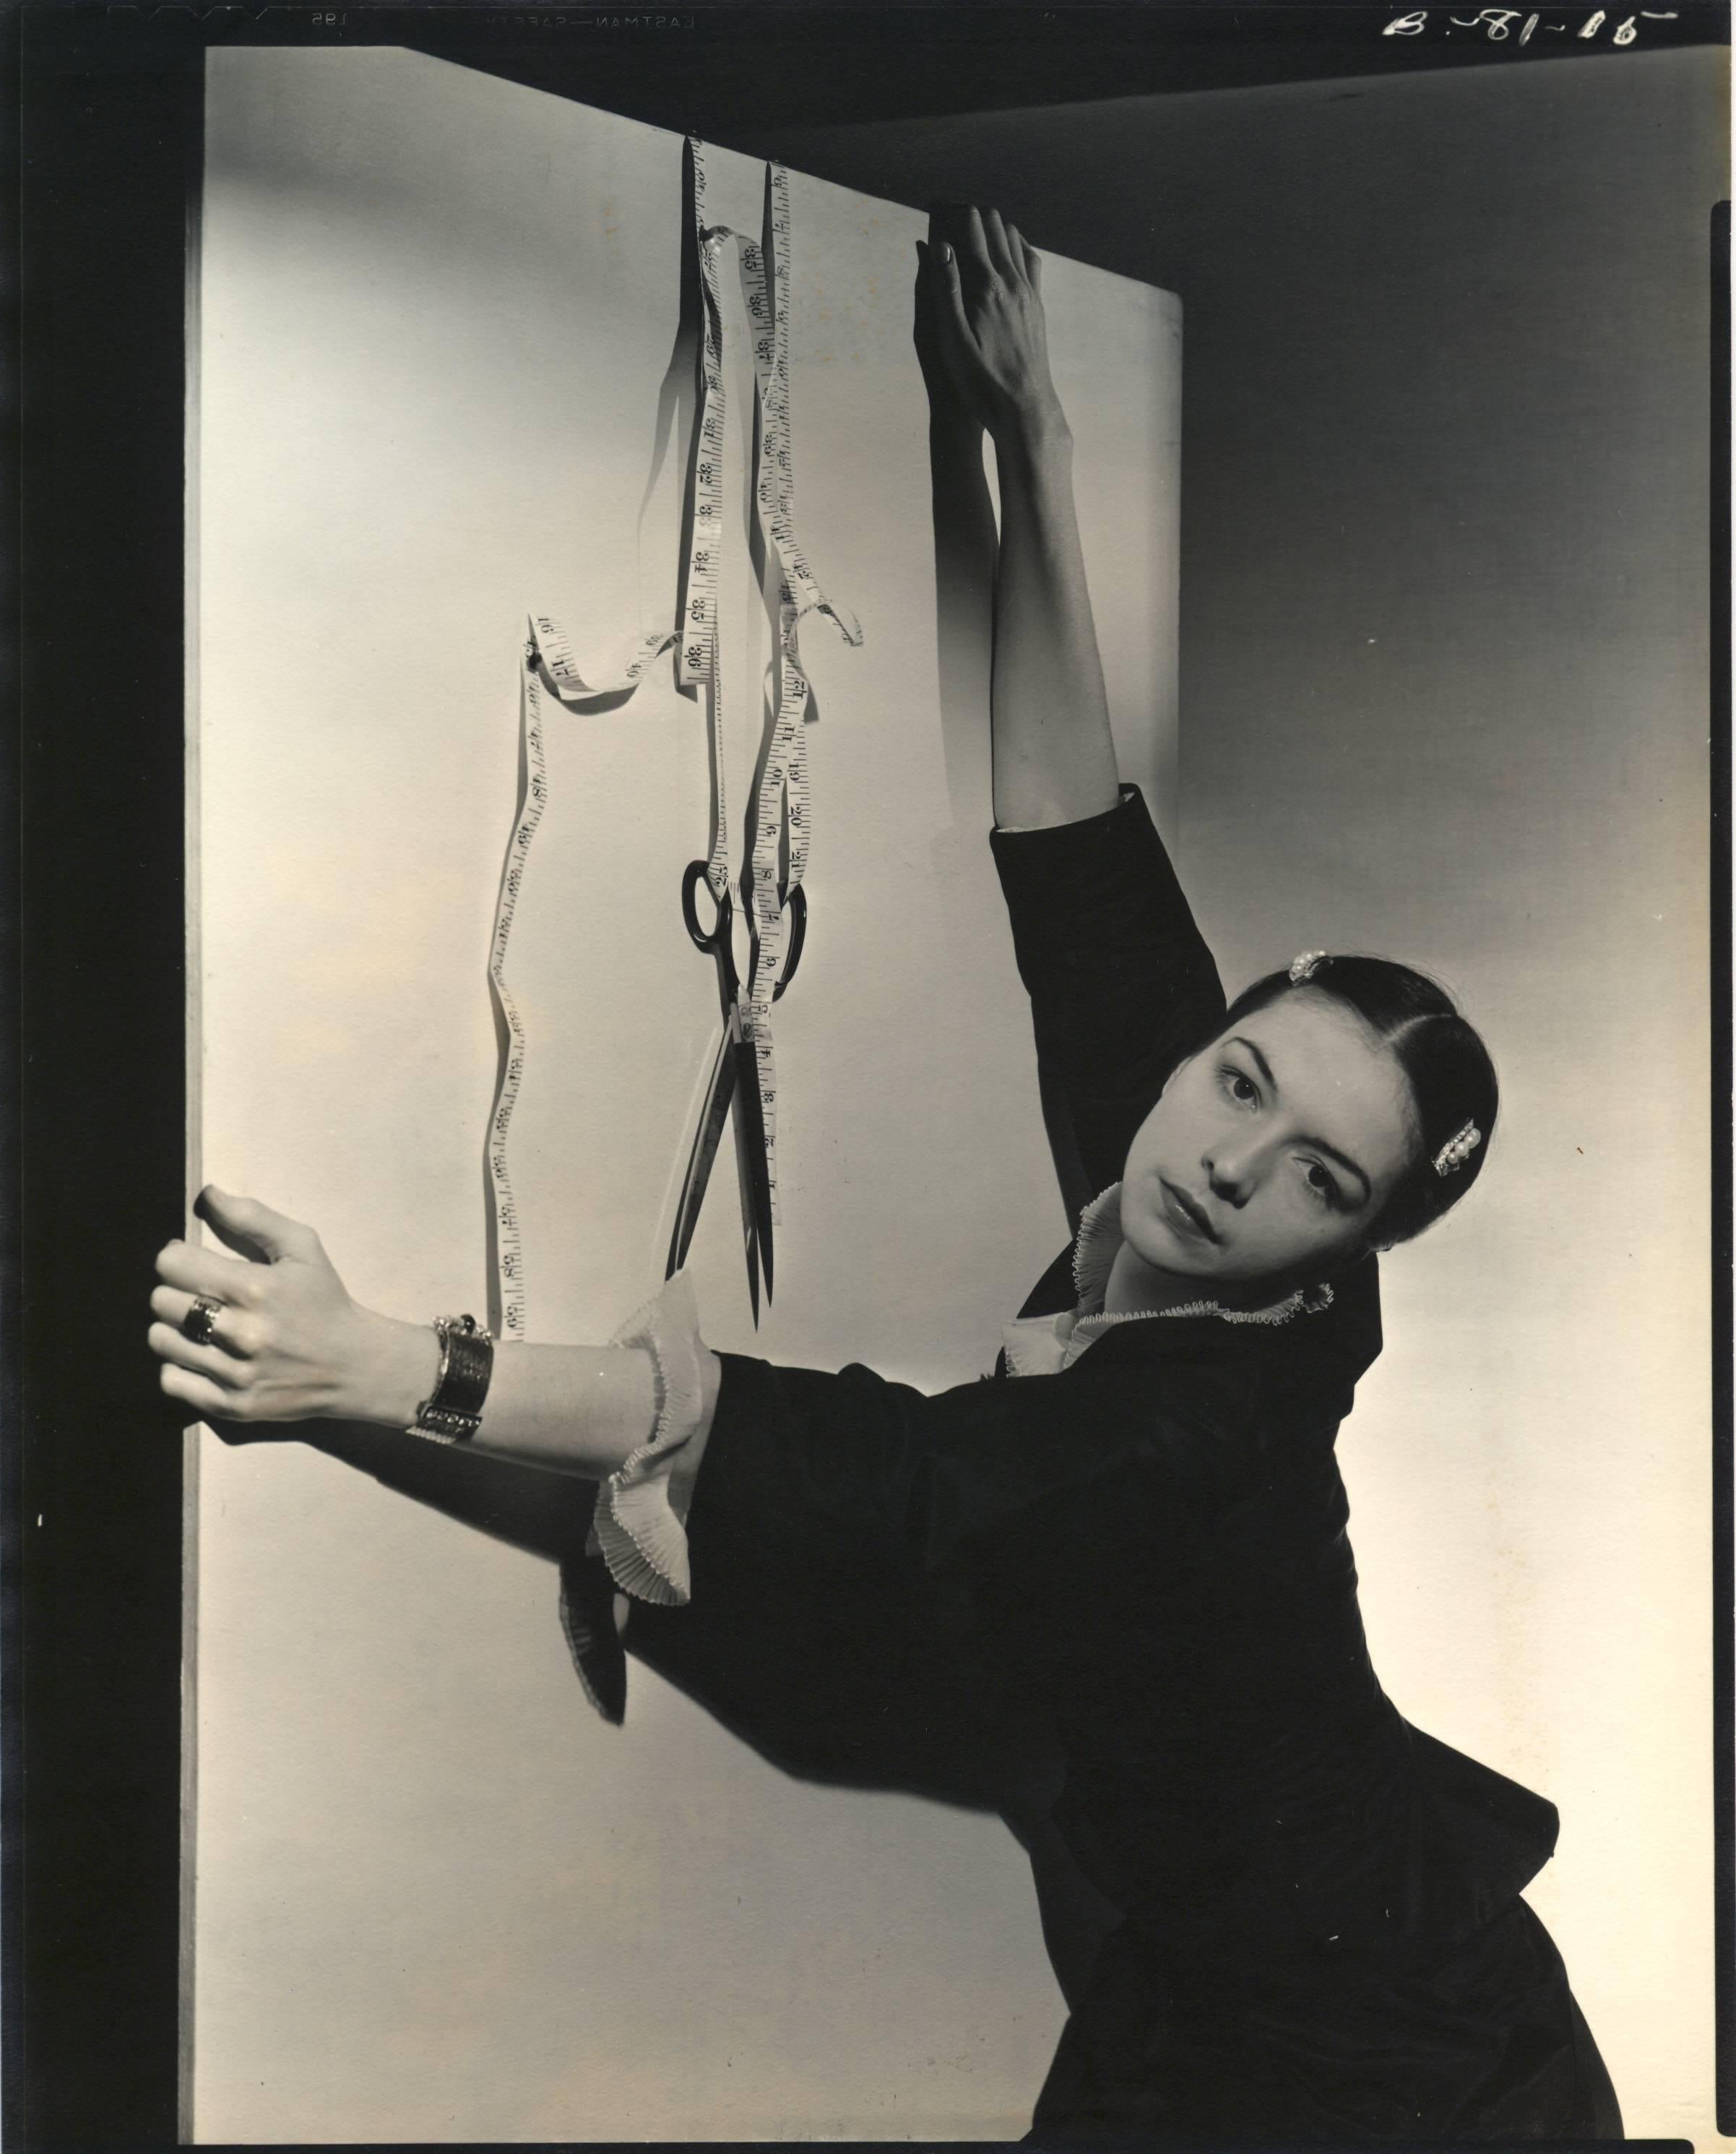 Cecil Beaton Figurative Photograph - Surreal Vignette, Ruth Ford with tapemeasure.